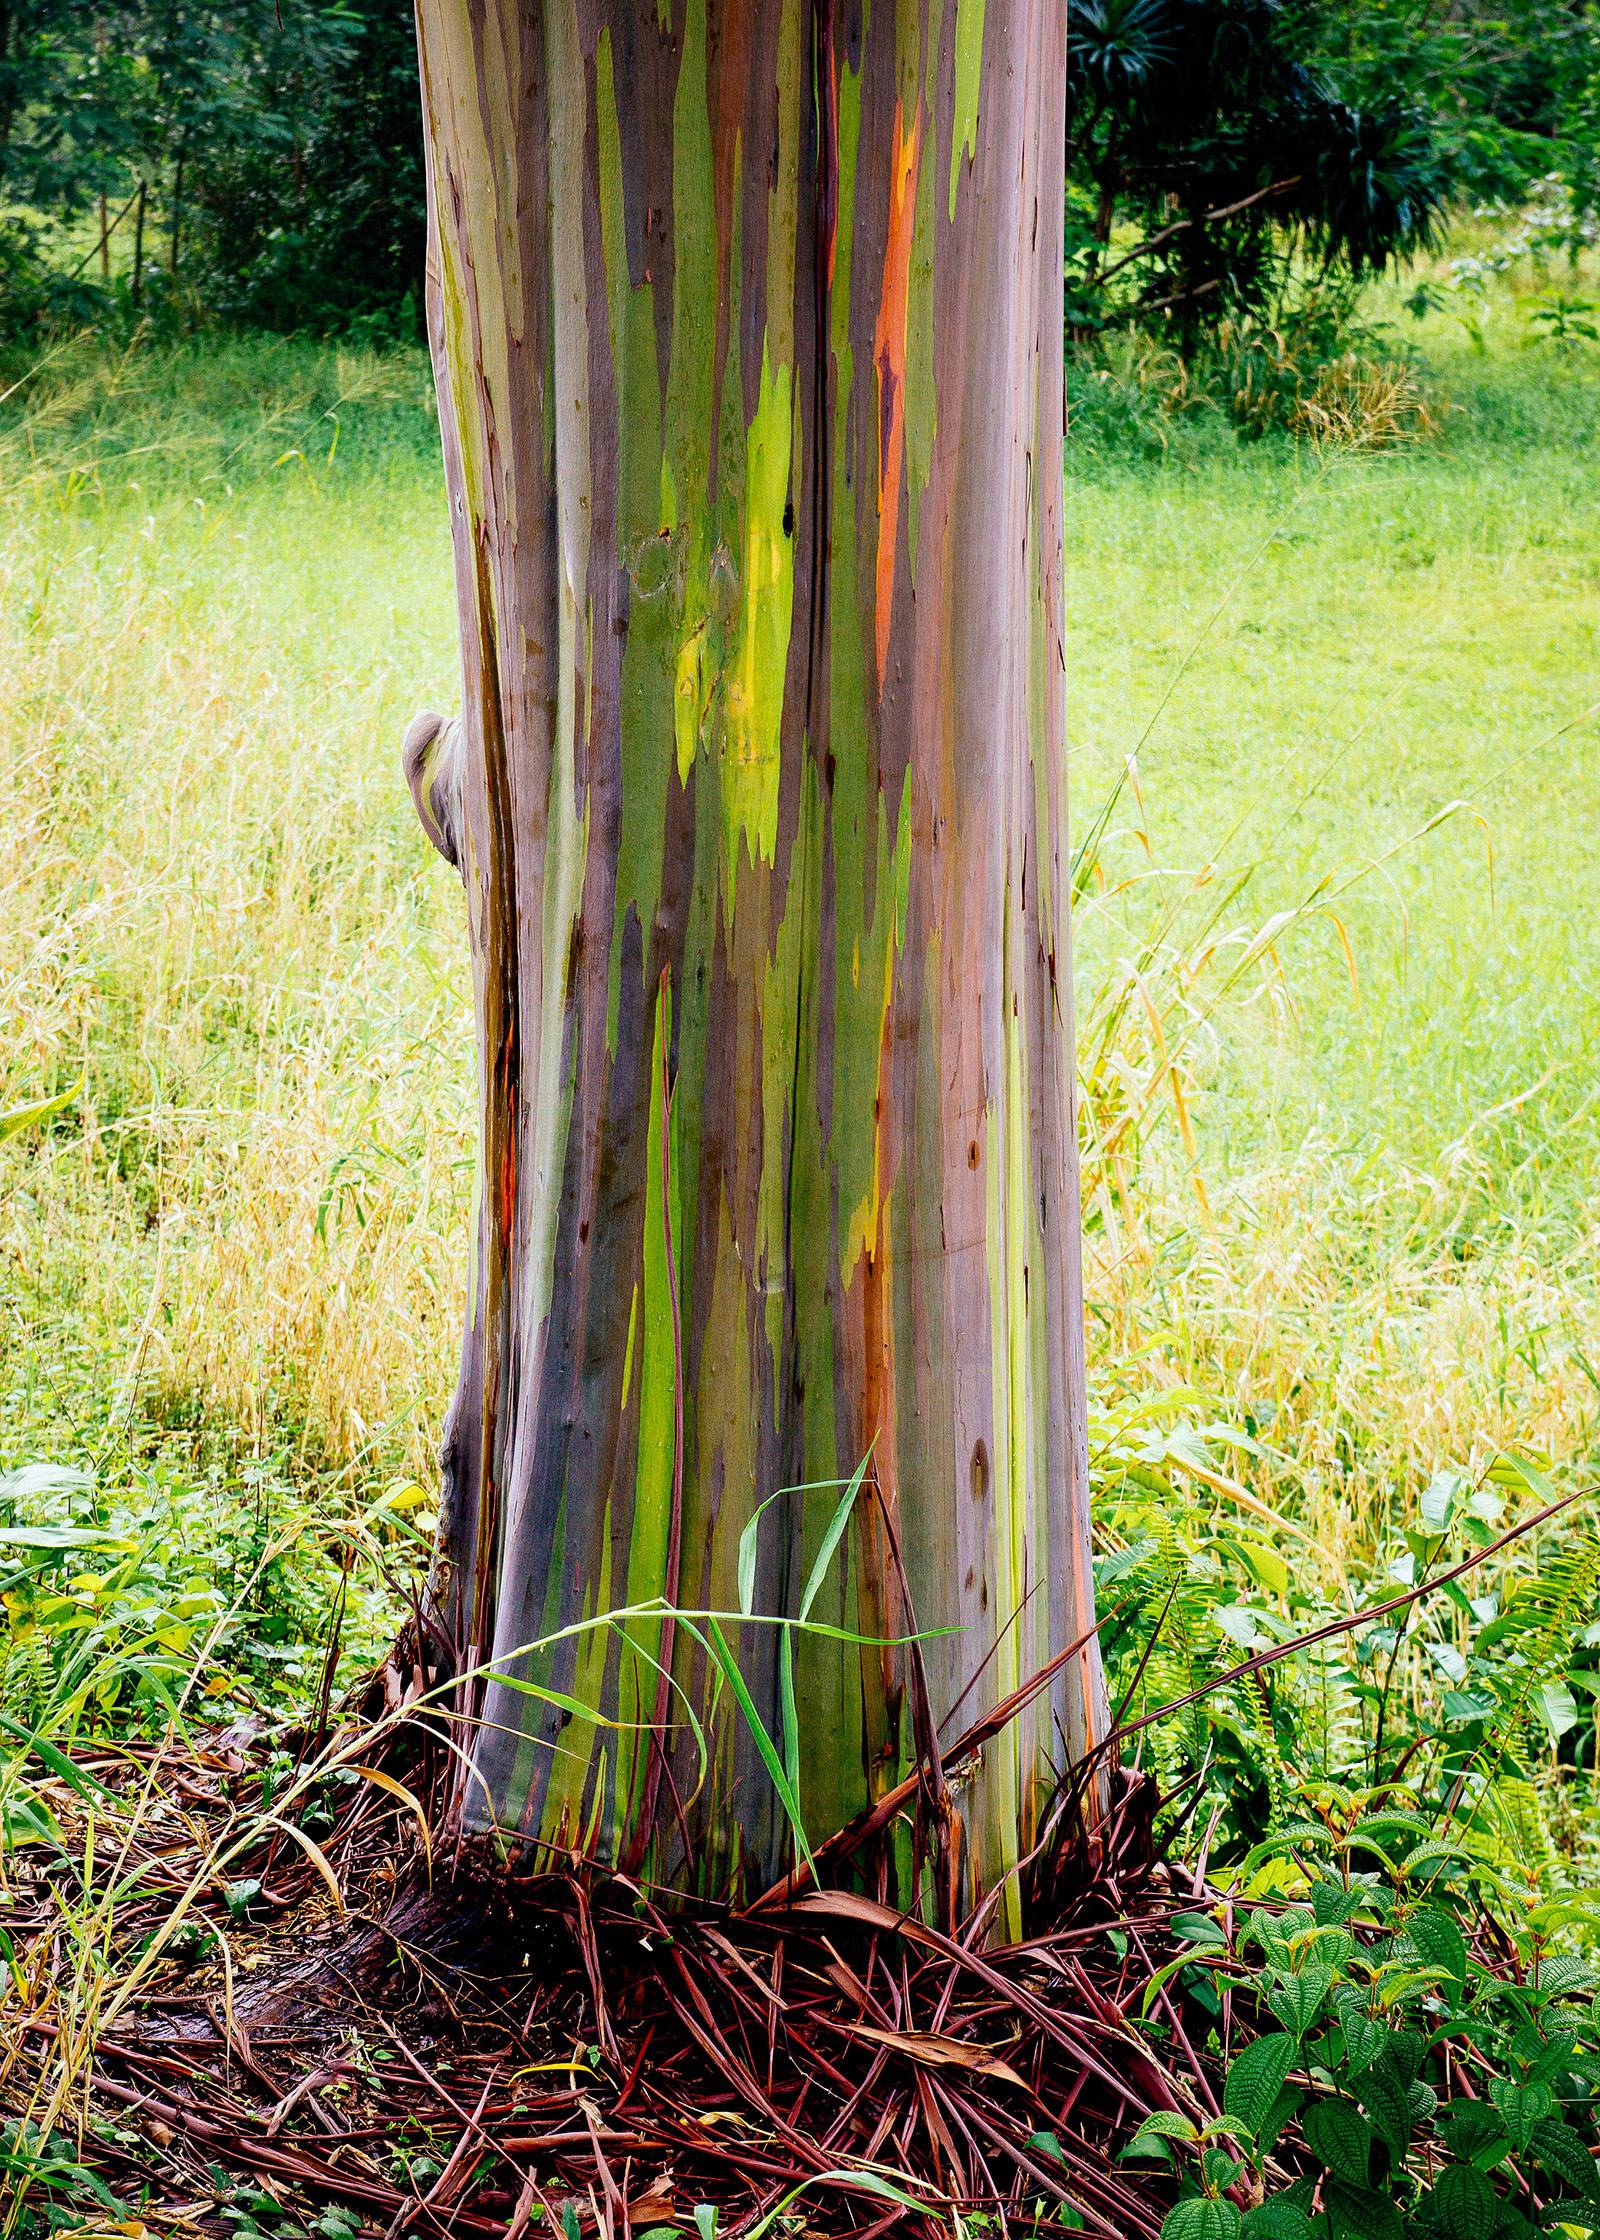 Close-up of fast-growing rainbow eucalyptus tree trunk with colorful peeling bark